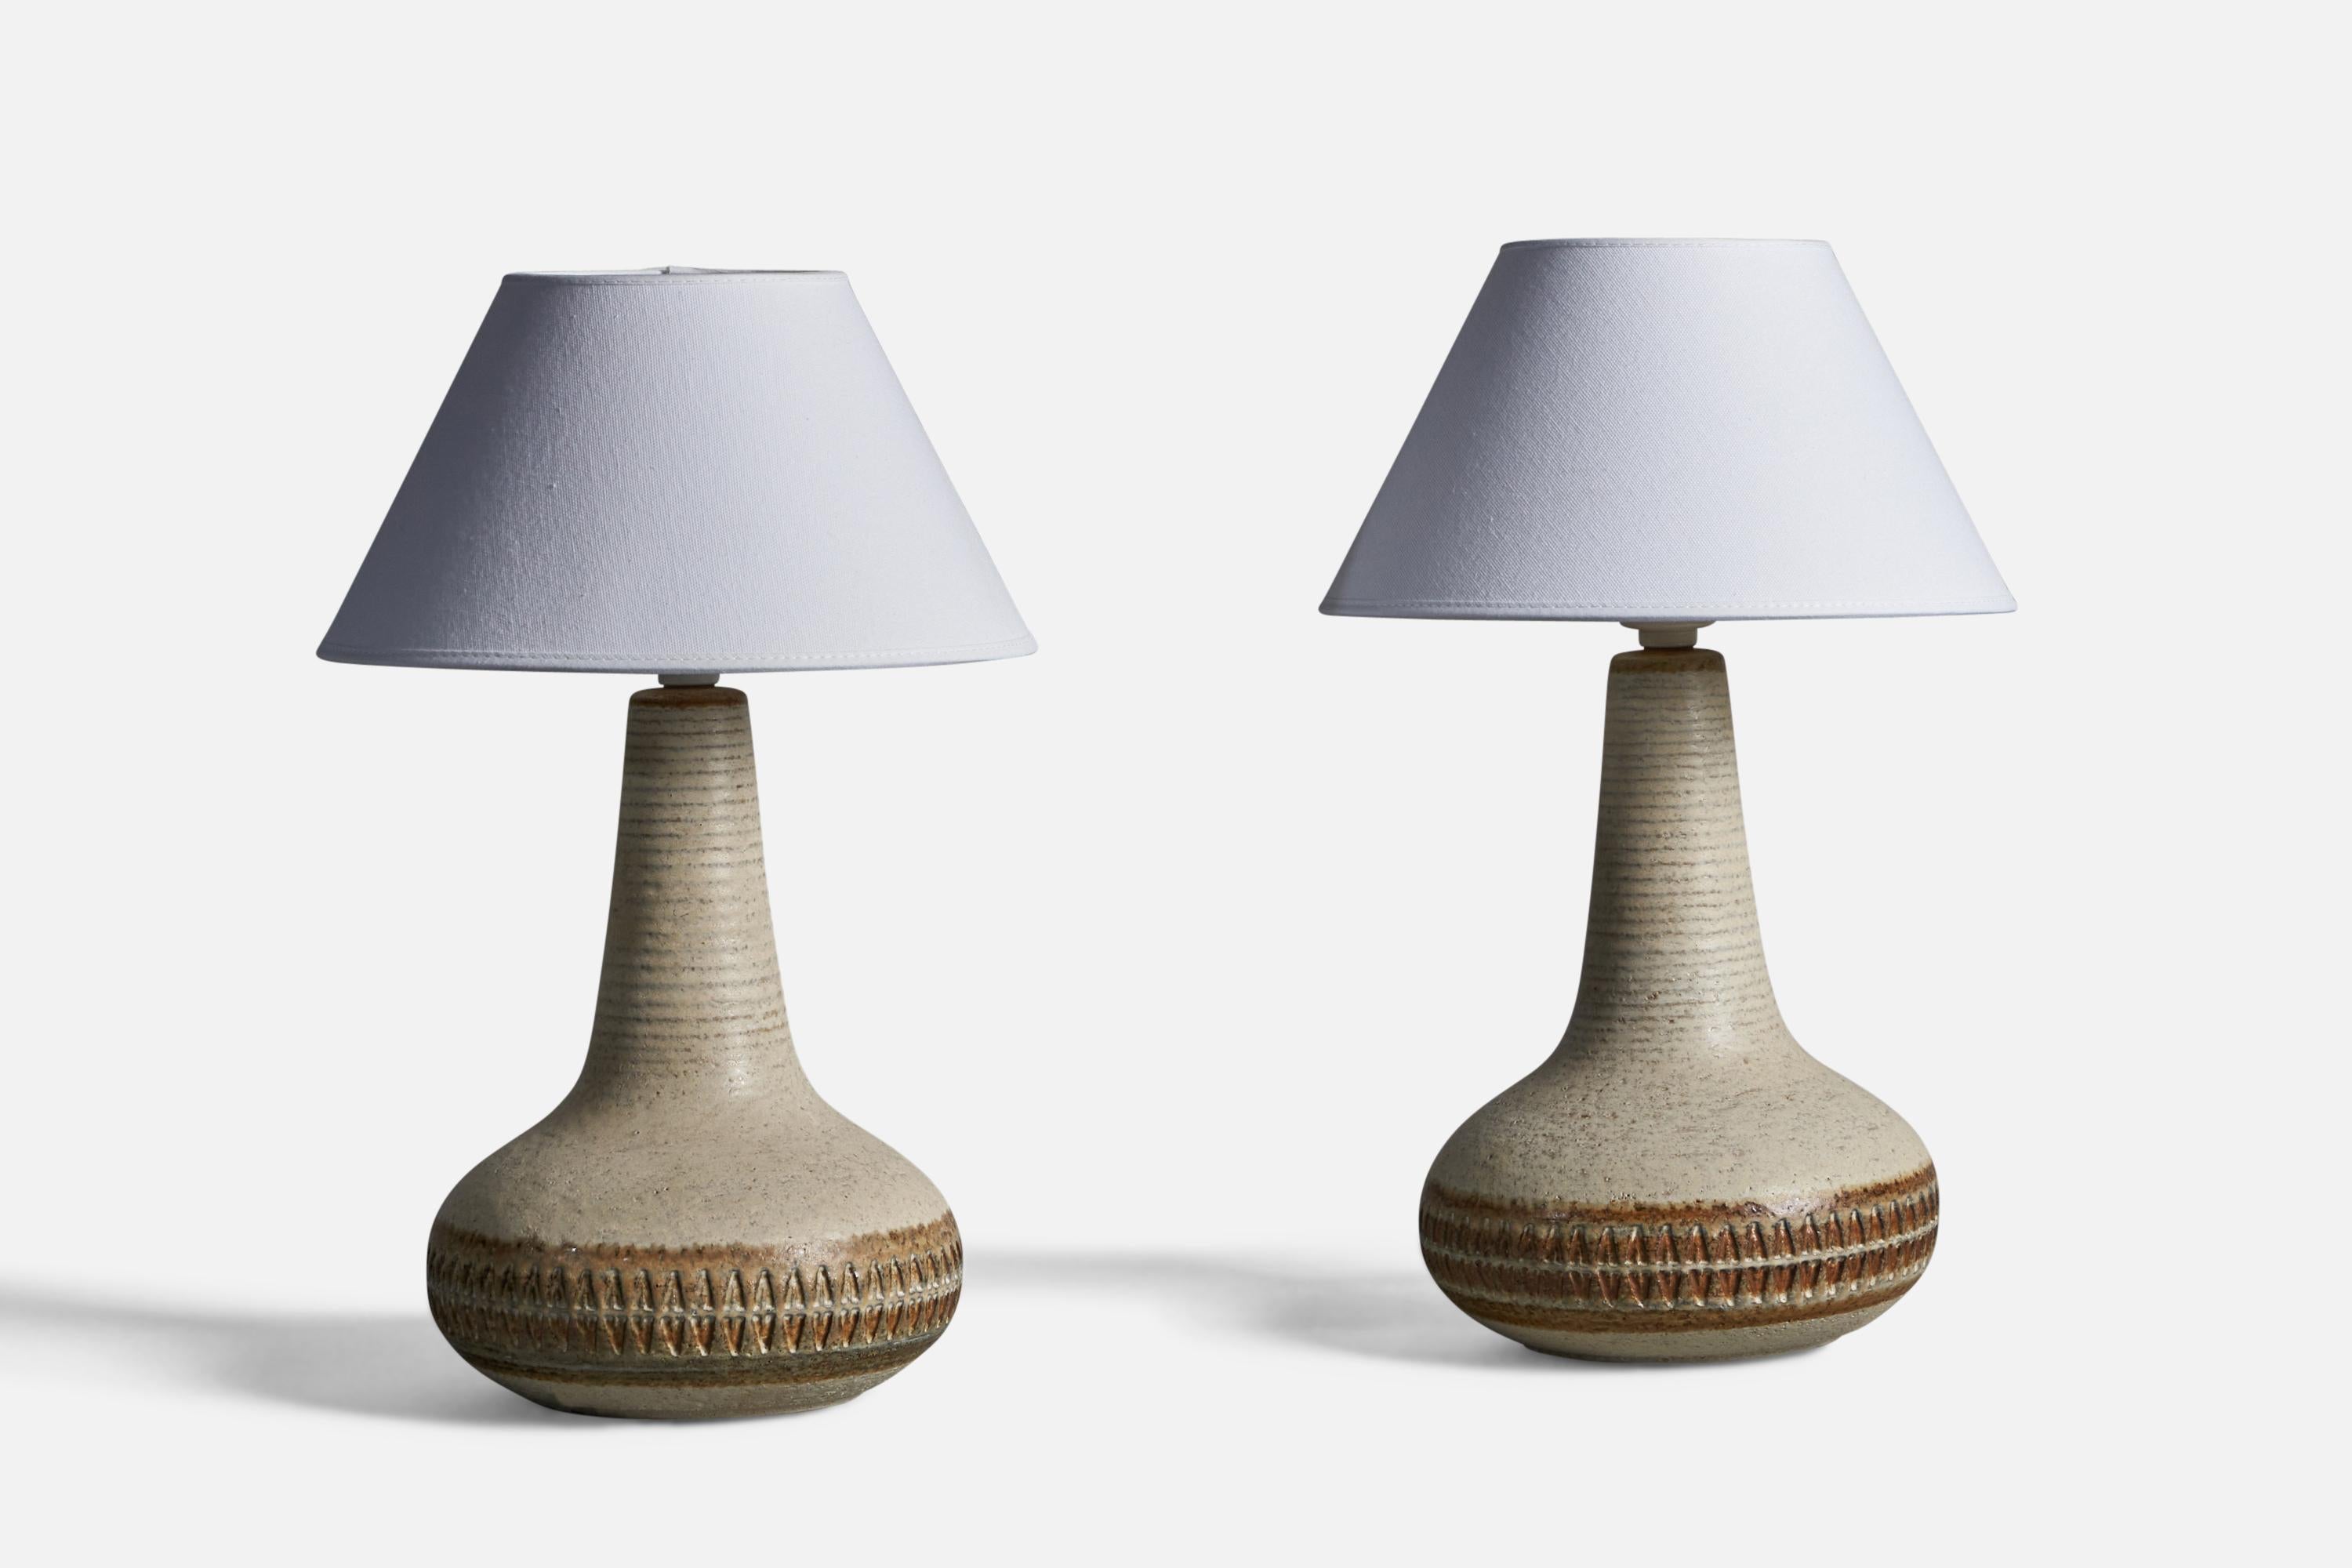 A pair of grey and brown glazed stoneware table lamps, designed and produced by 
Søholm, Bornholm, Denmark, 1960s.

Dimensions of Lamp (inches): 12.5